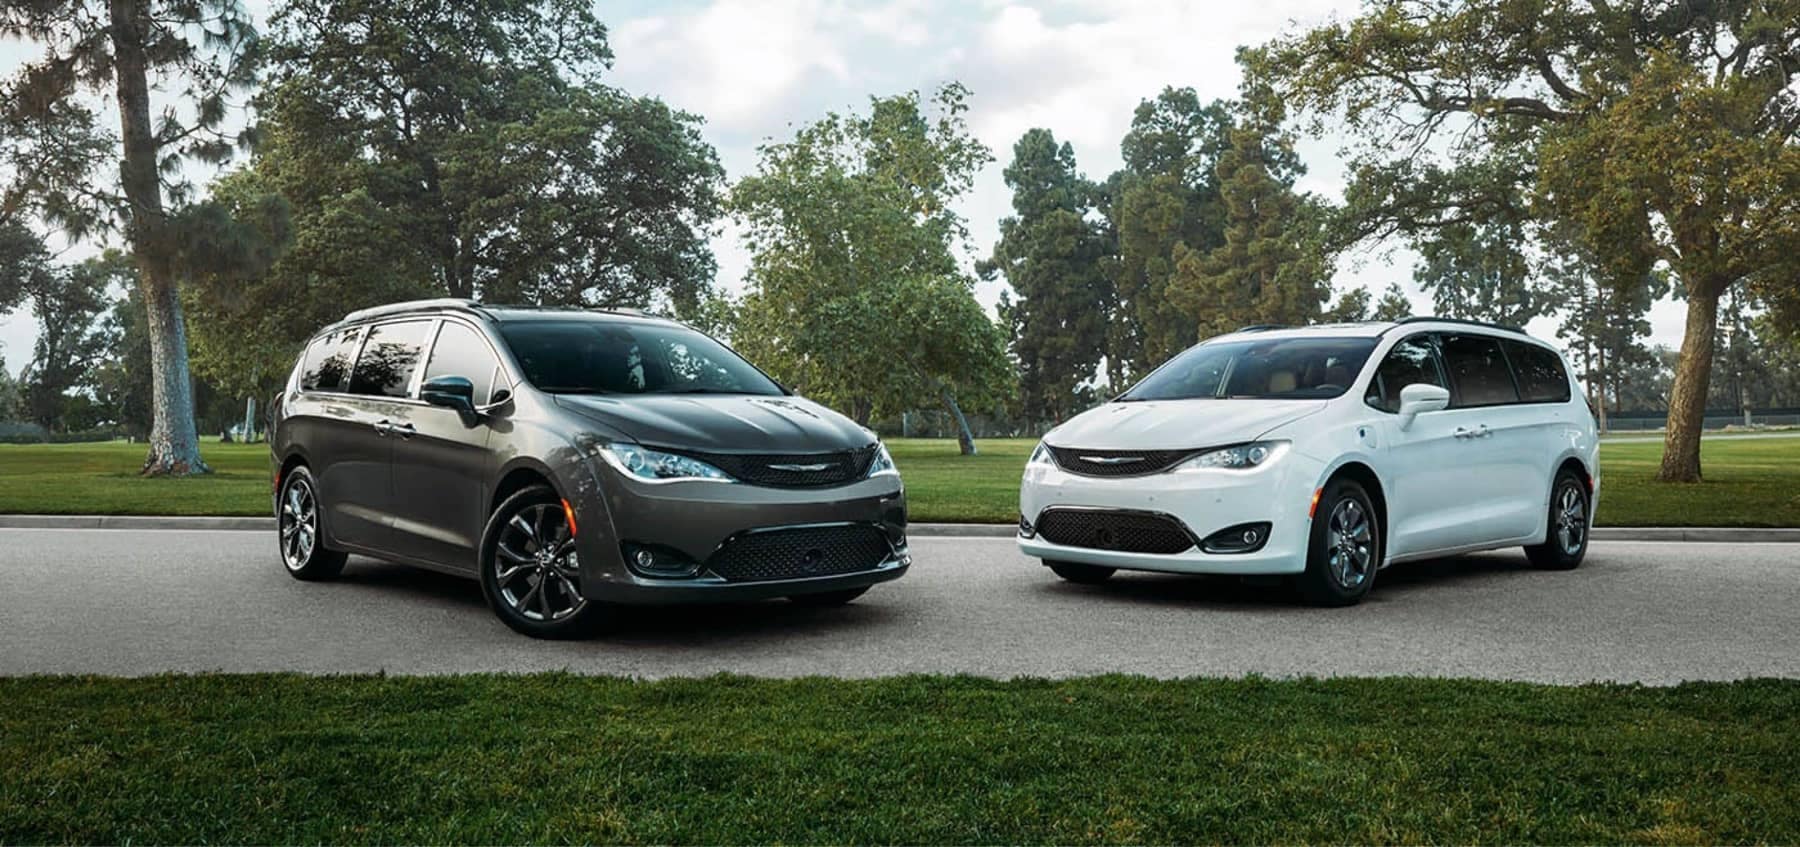 2020-chrysler-pacificas parked next to each other